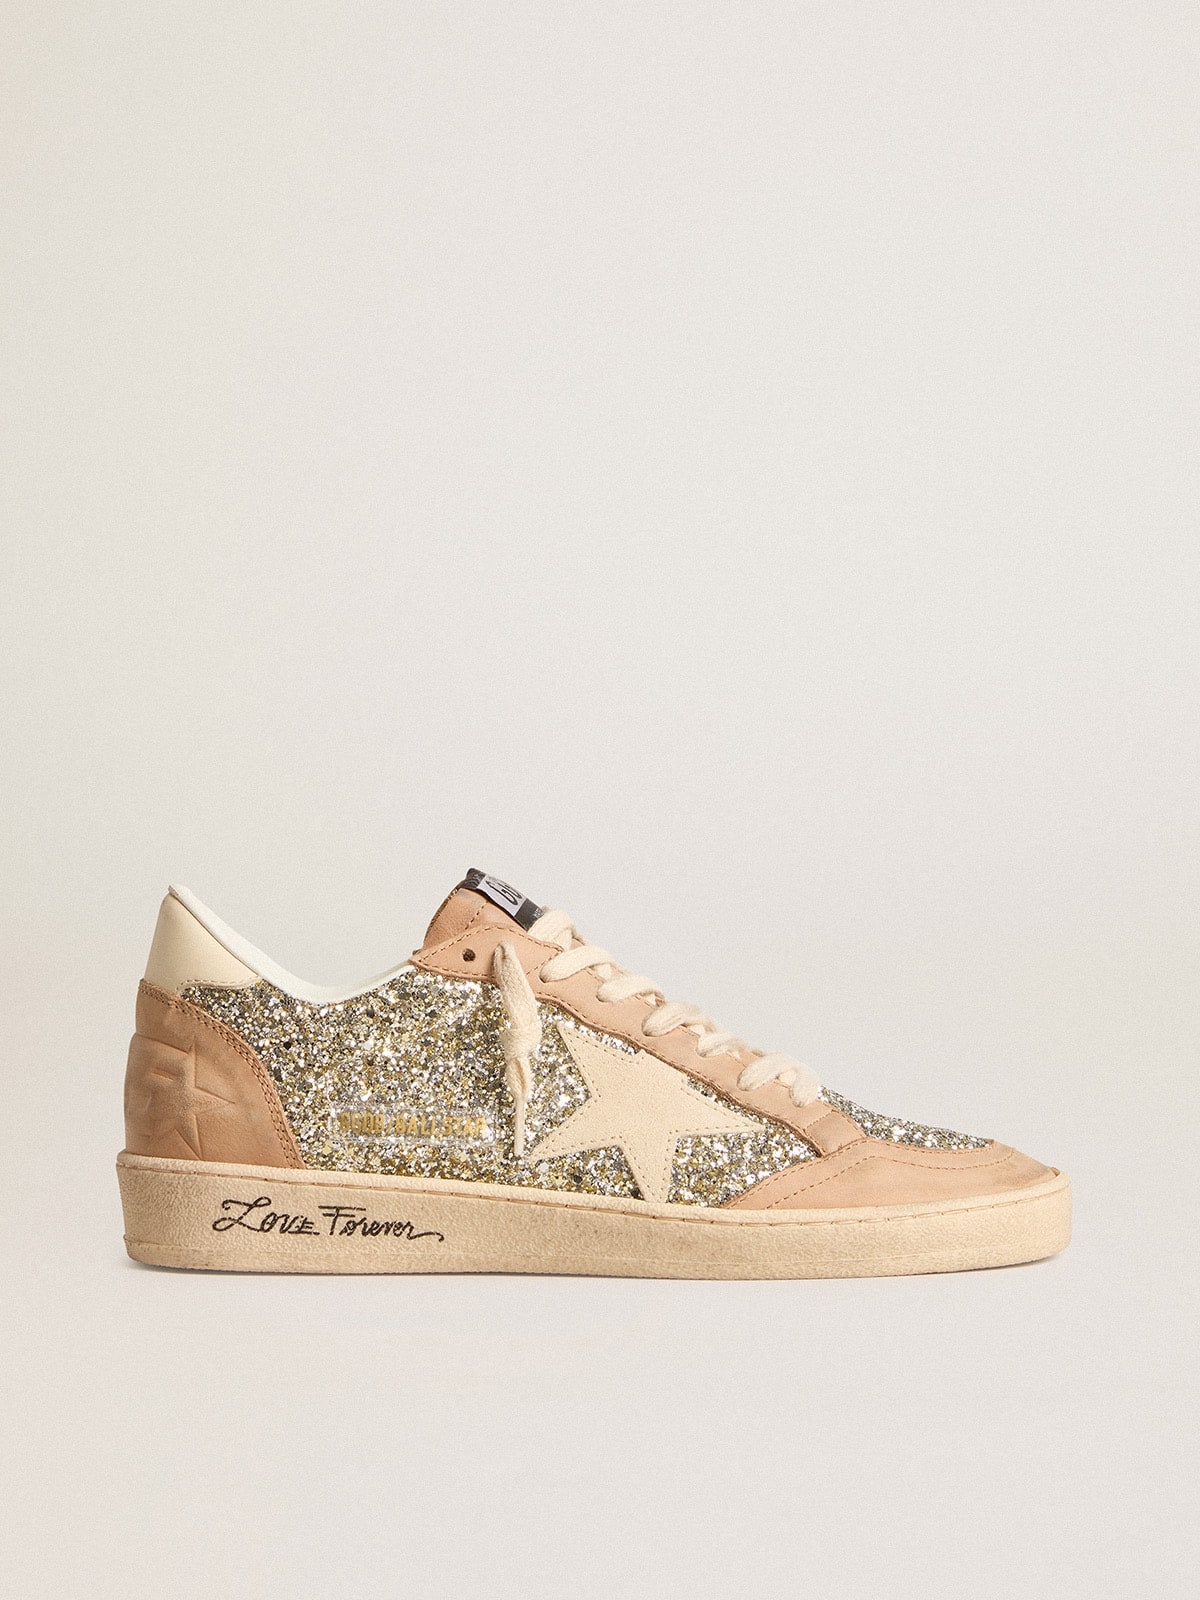 Ball Star in platinum glitter with cream leather star and nubuck toe - 1